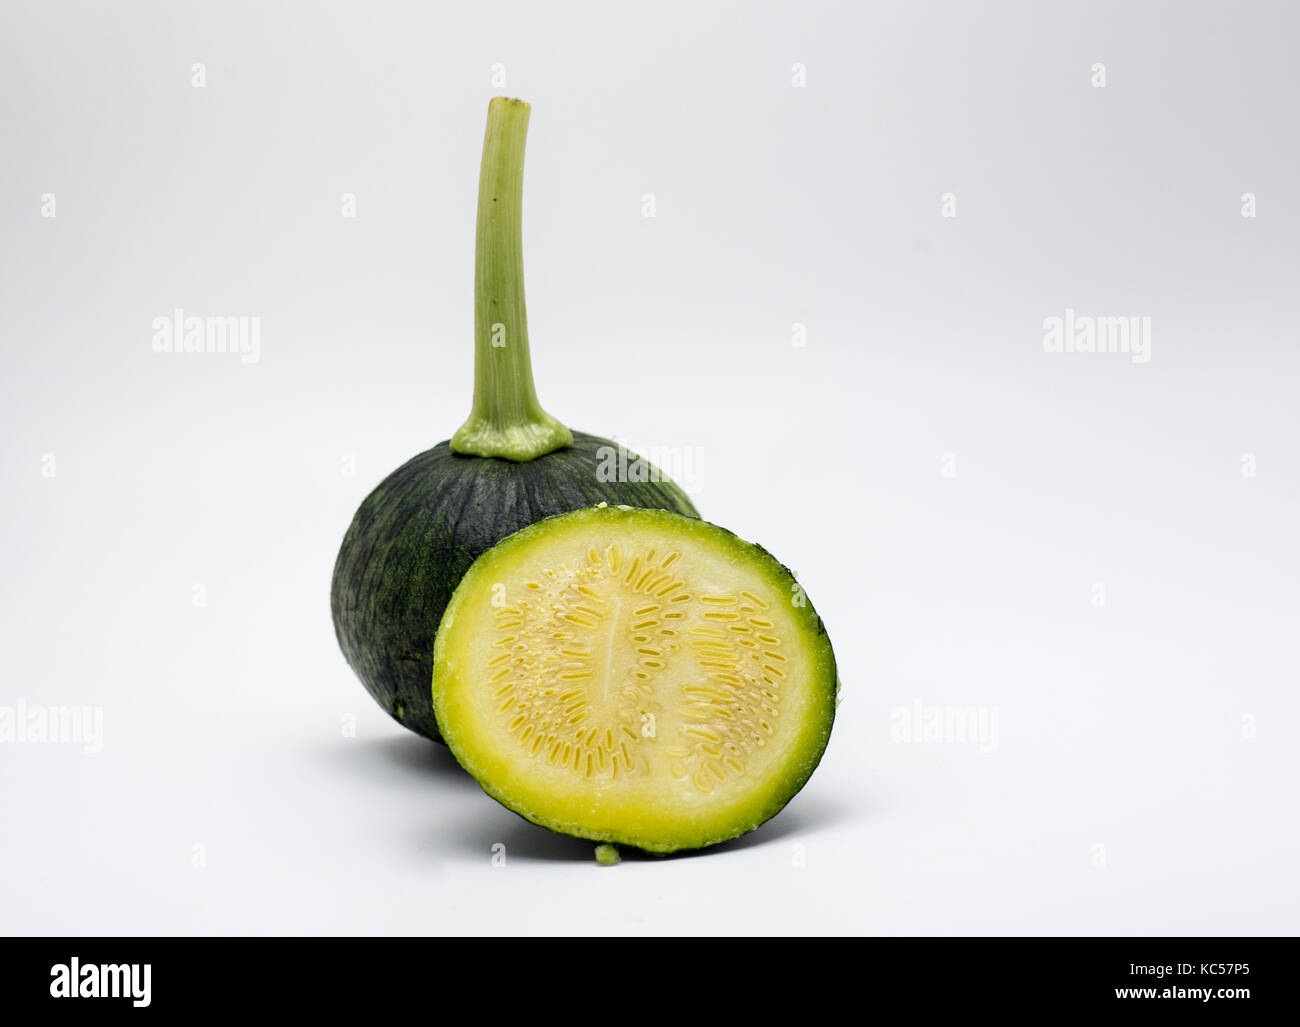 slice cucumber and arranging like gost show trunk Stock Photo